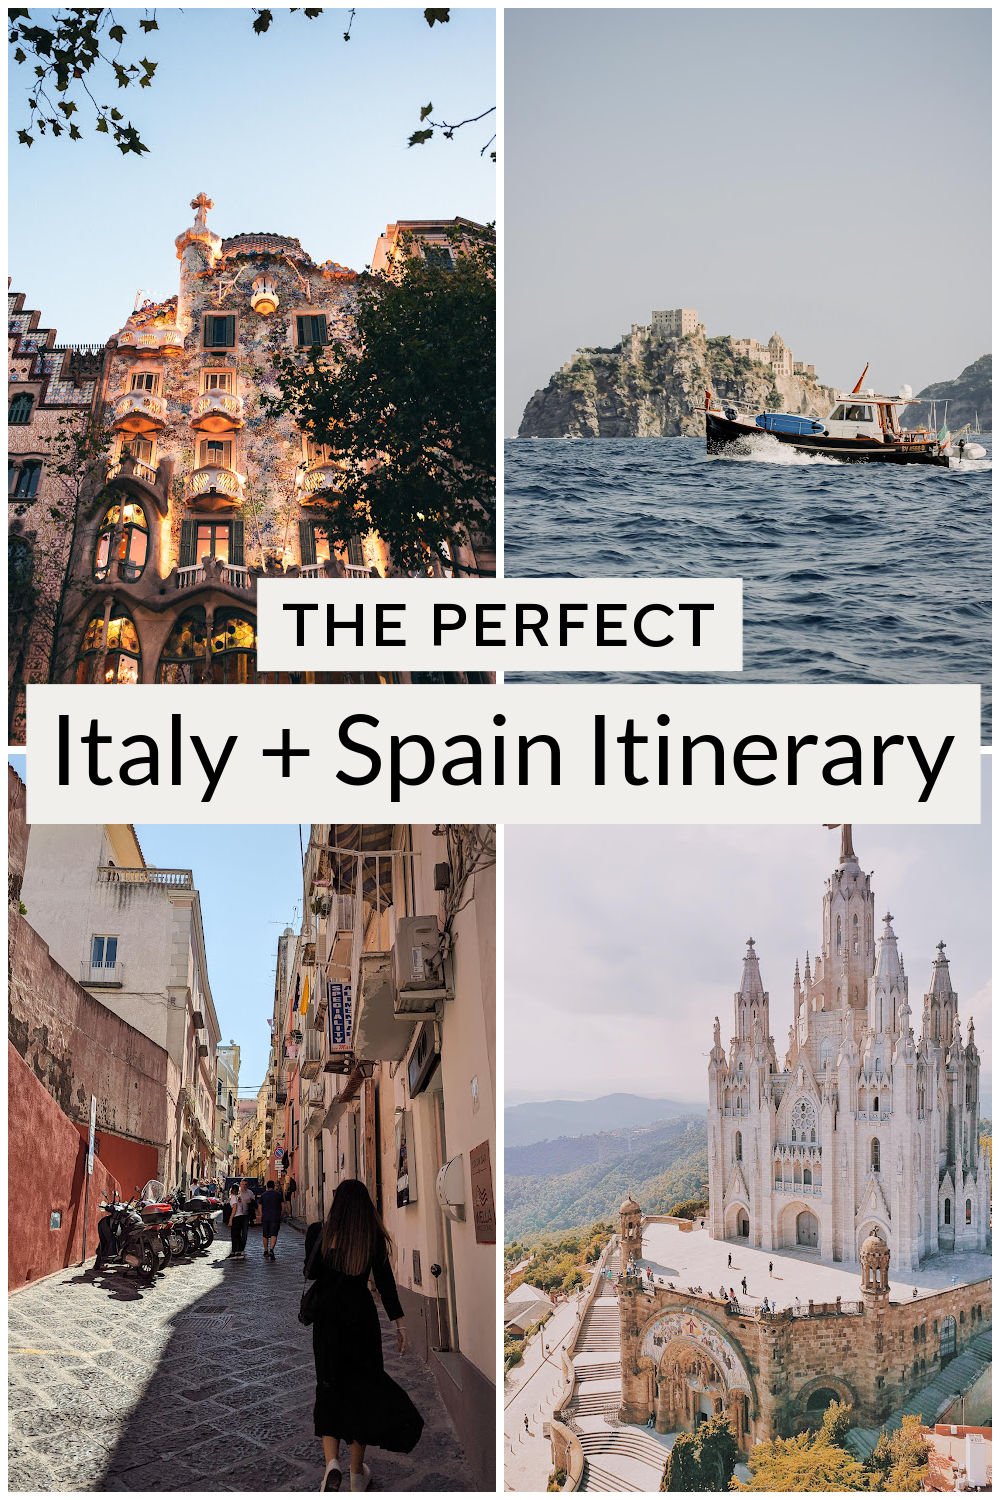 The best Europe itinerary 3 weeks, including the best spots in Italy and Spain. Europe travel destinations, Europe vacation, Italy travel tips, Spain travel guide